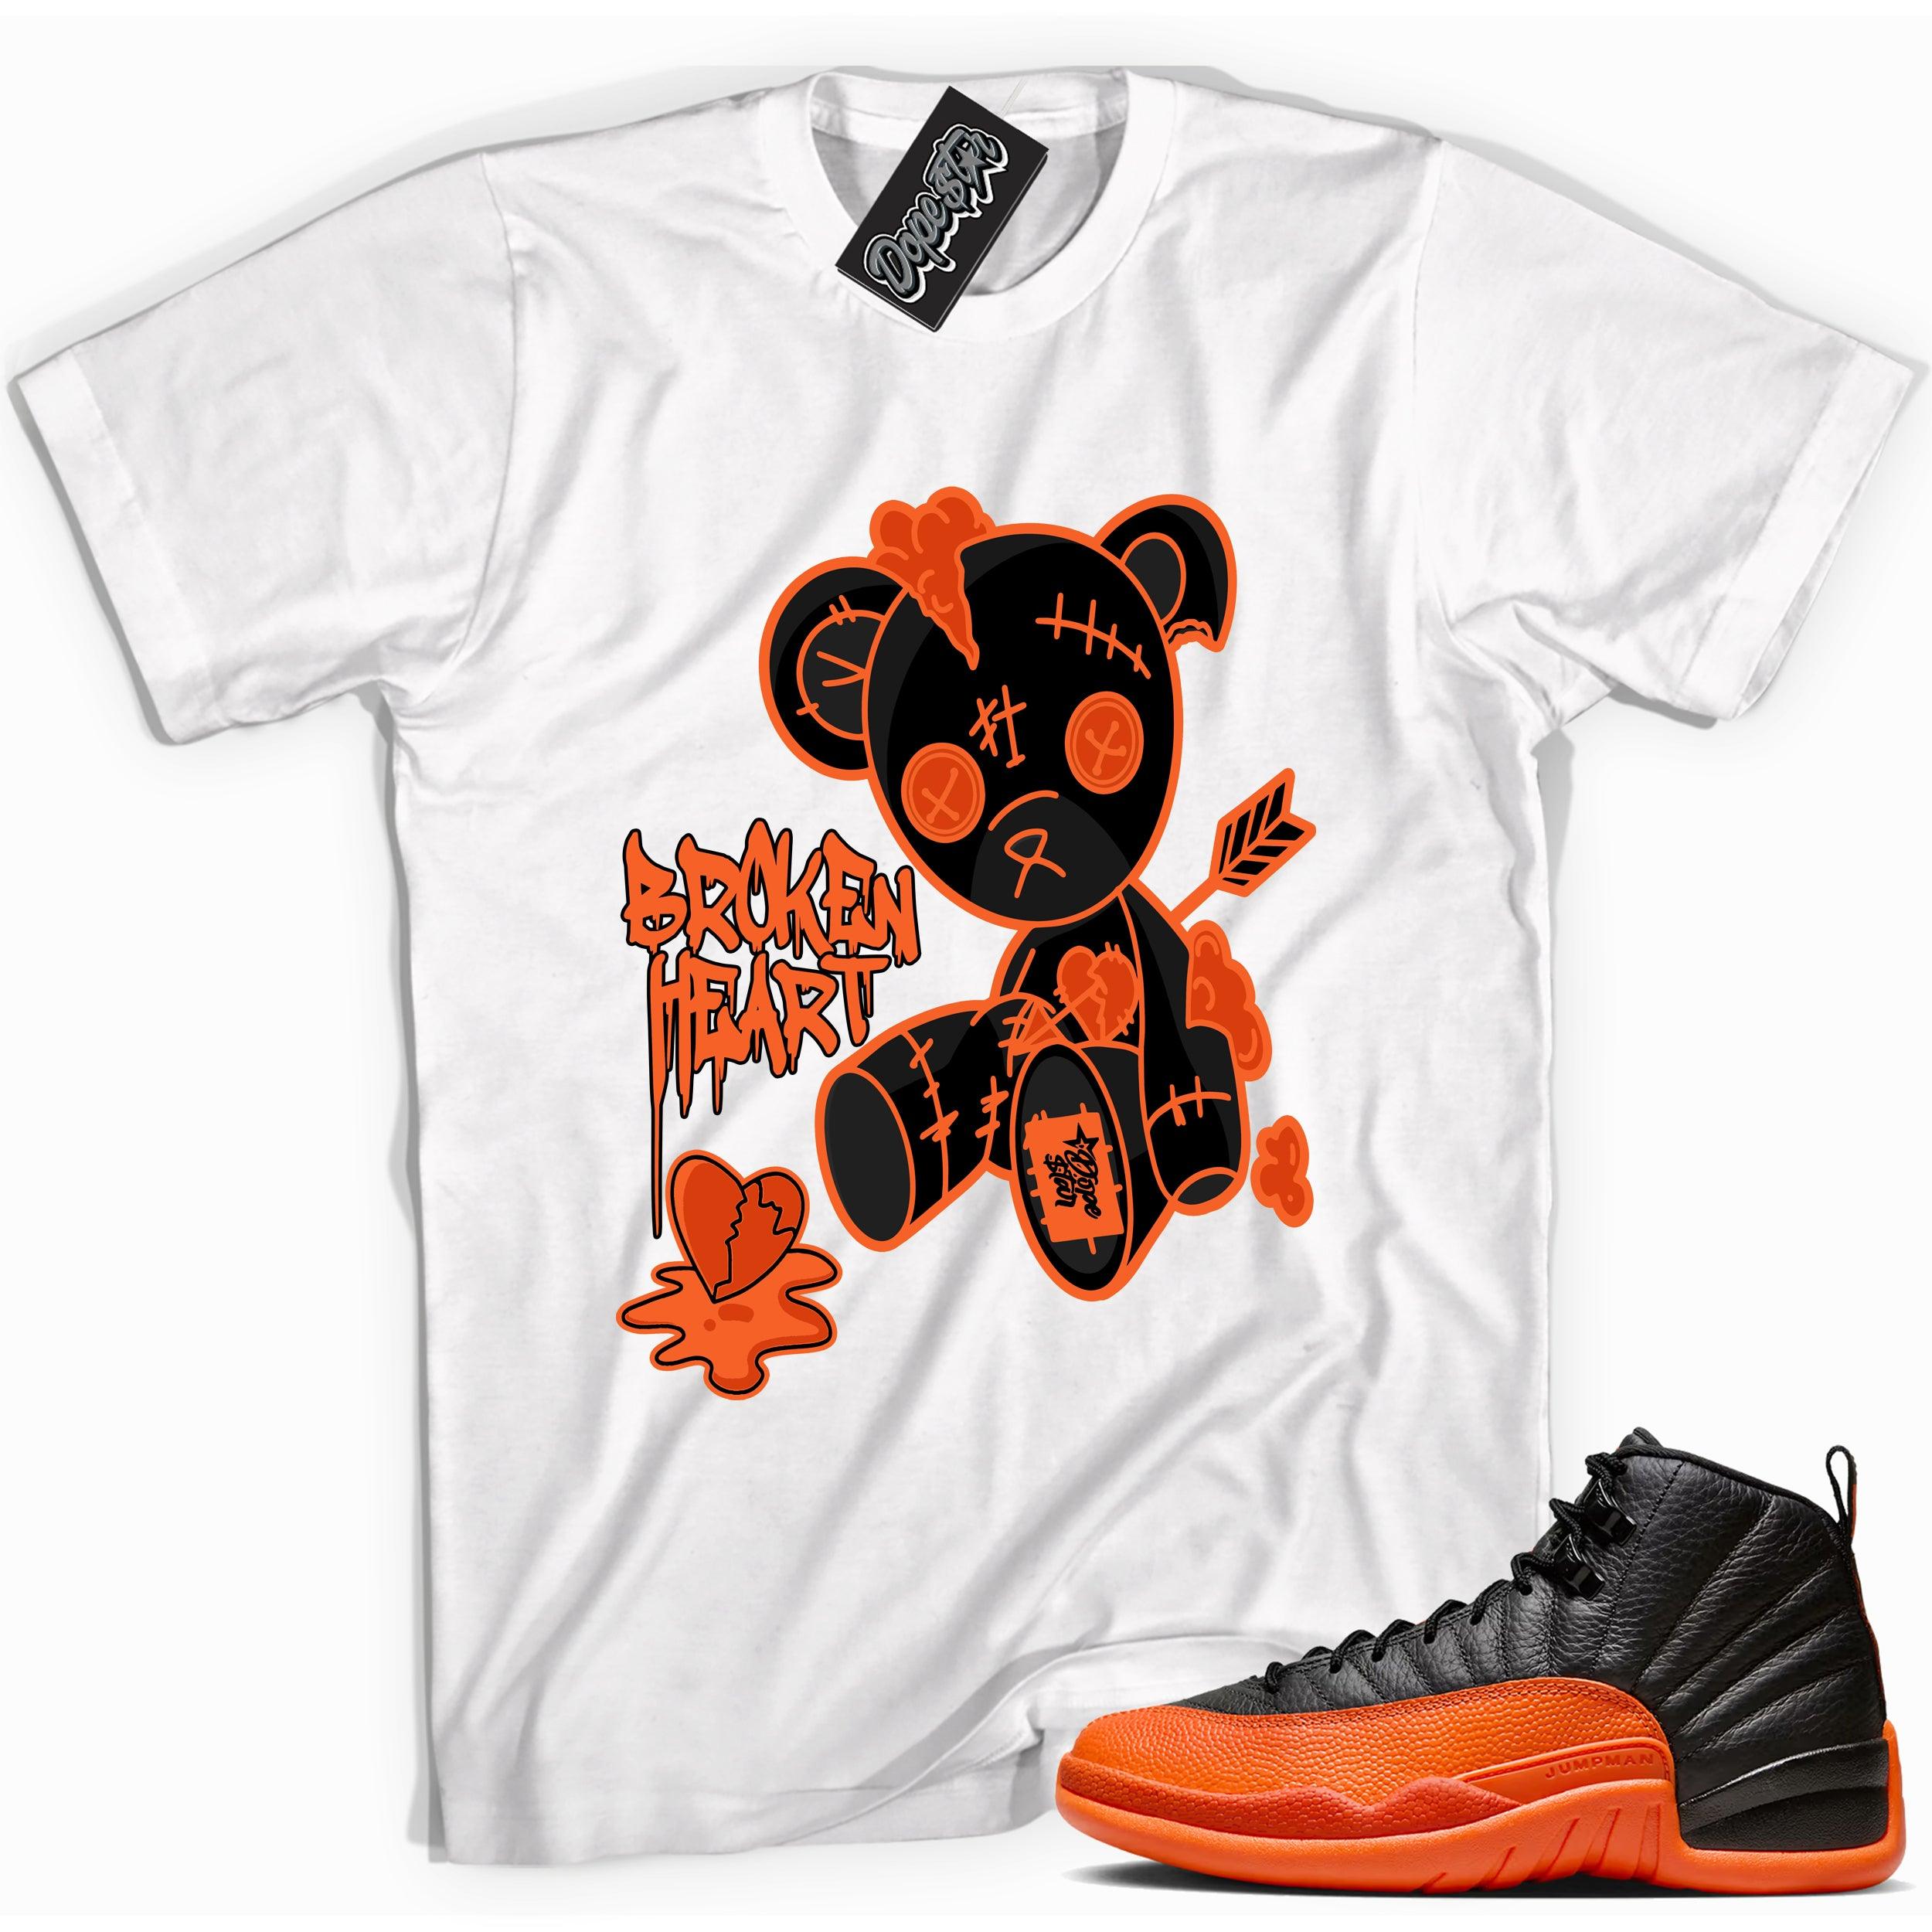 Cool White graphic tee with “ Broken Heart Bear ” print, that perfectly matches Air Jordan 12 Retro WNBA All-Star Brilliant Orange sneakers 